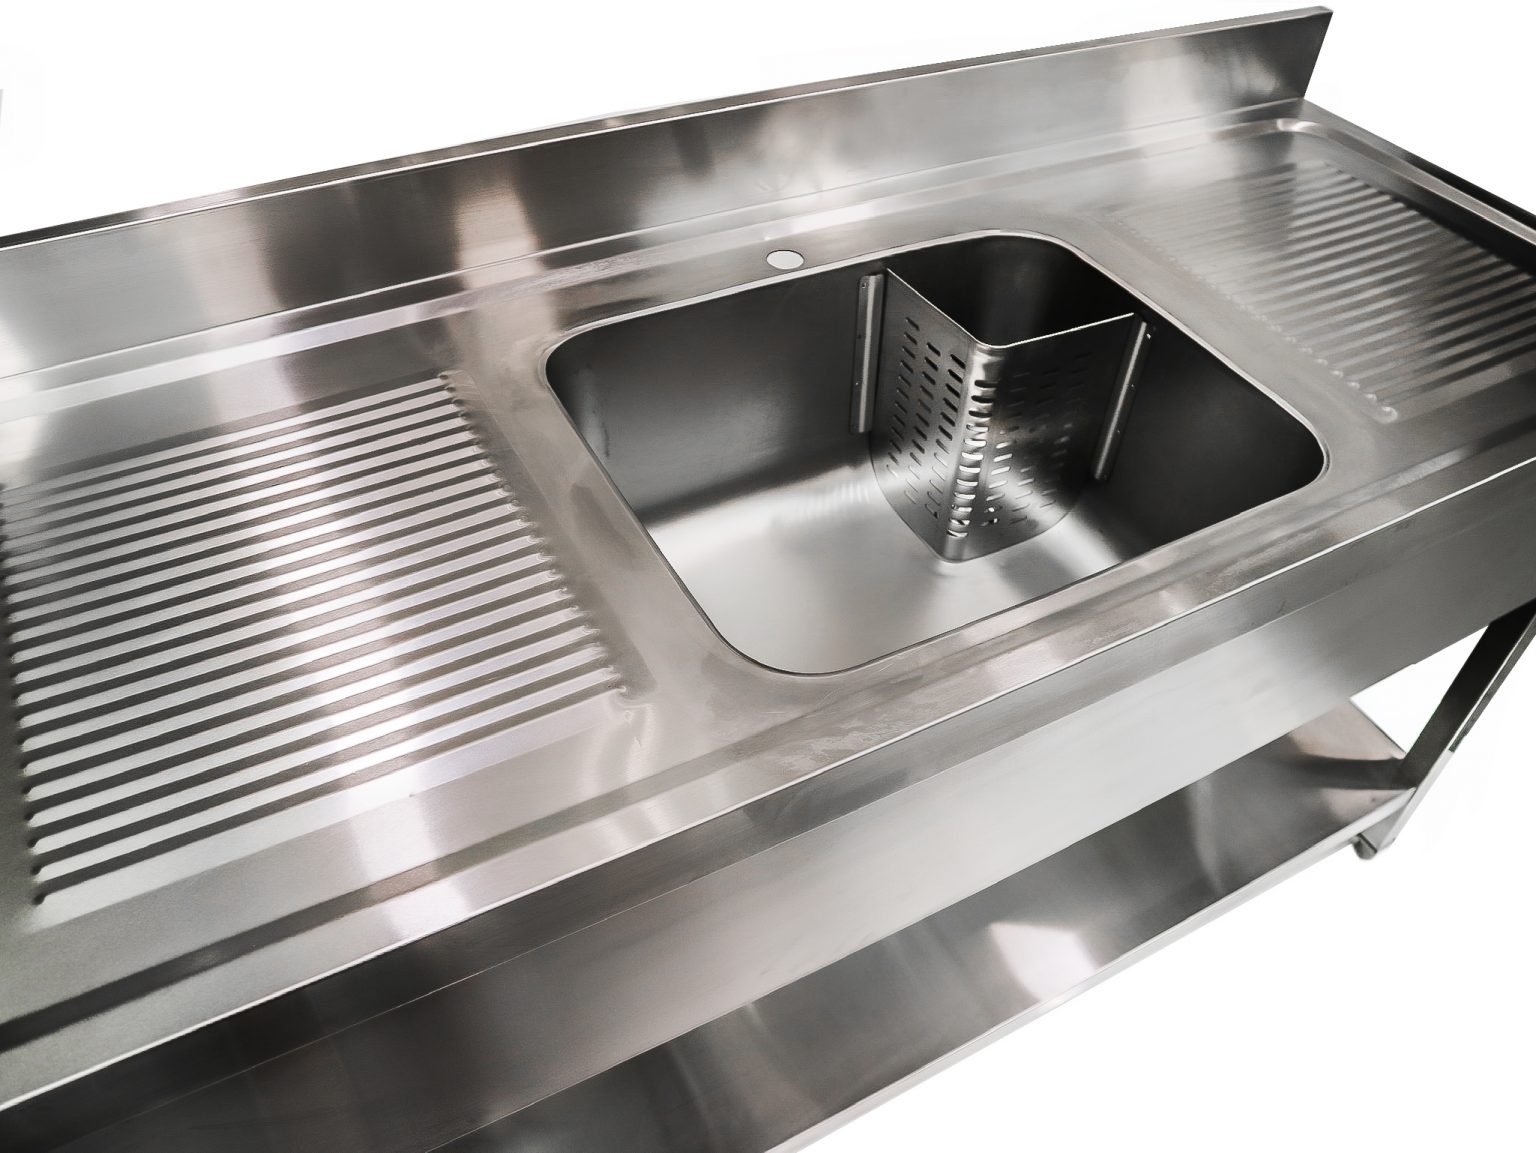 rremoving a stainless steel kitchen sink